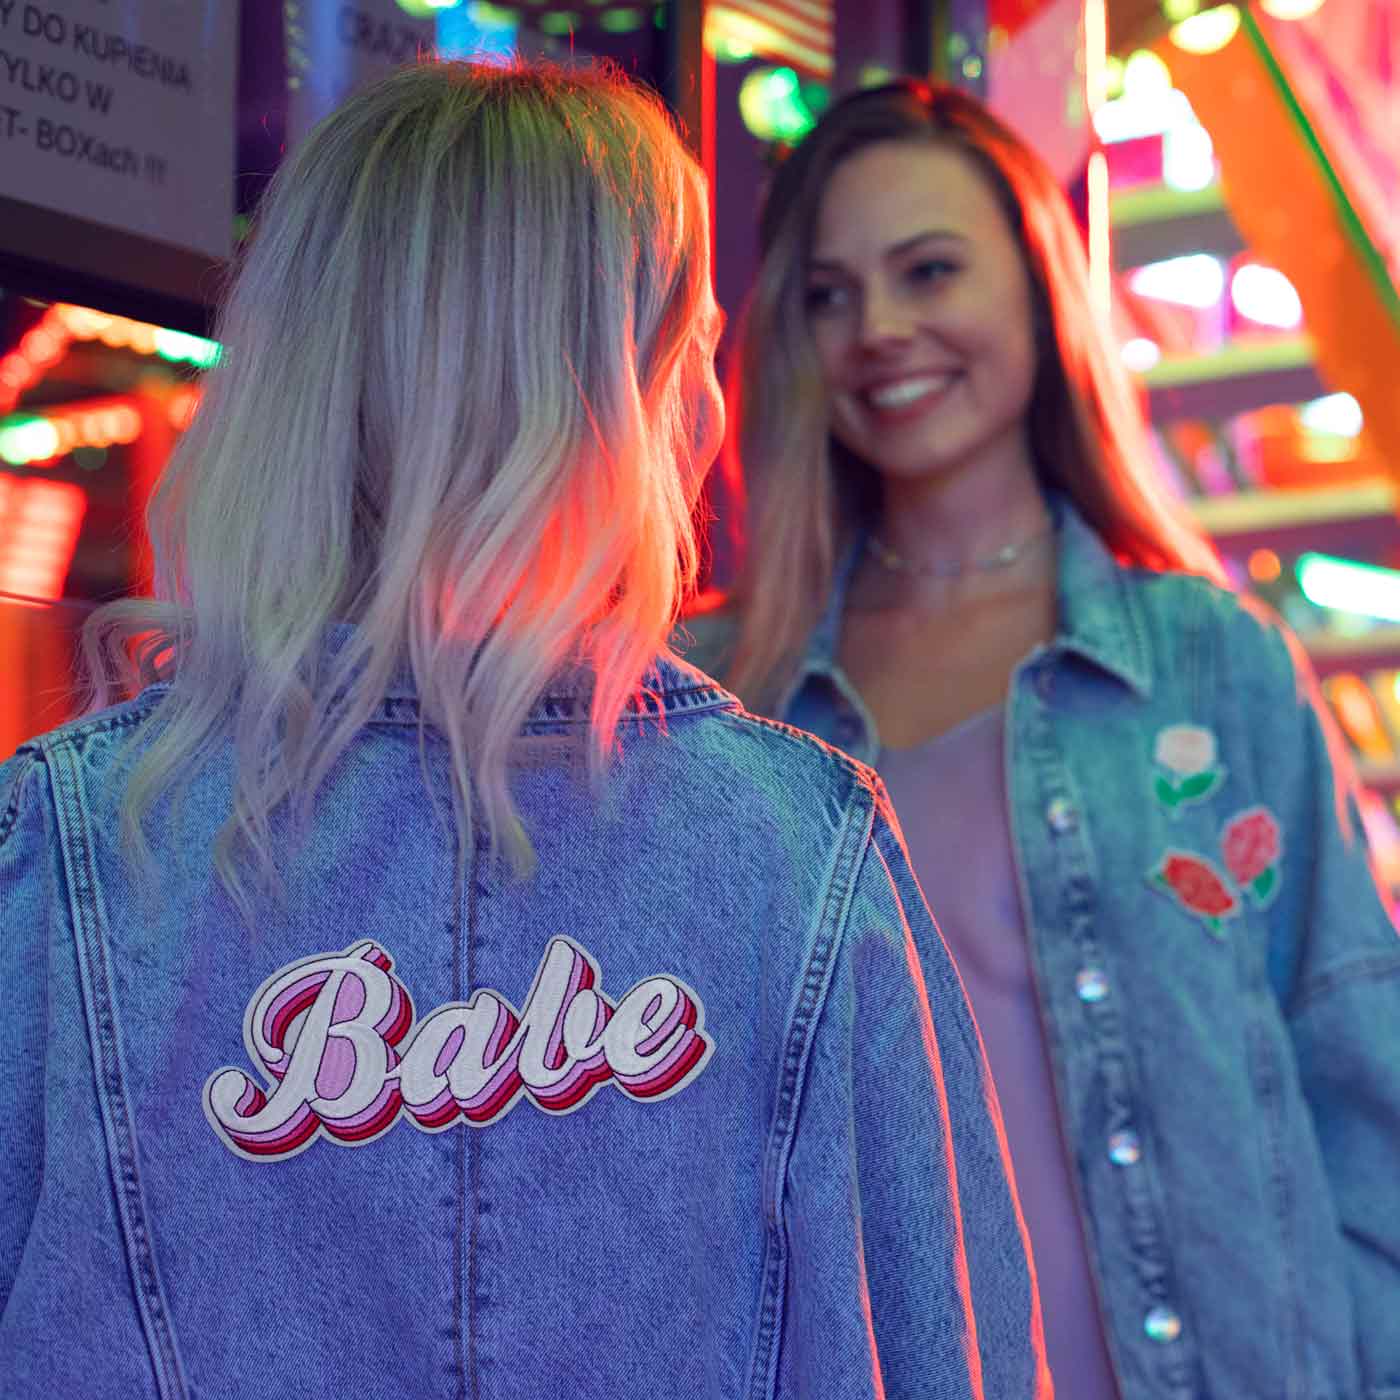 Patch clothes "Babe"